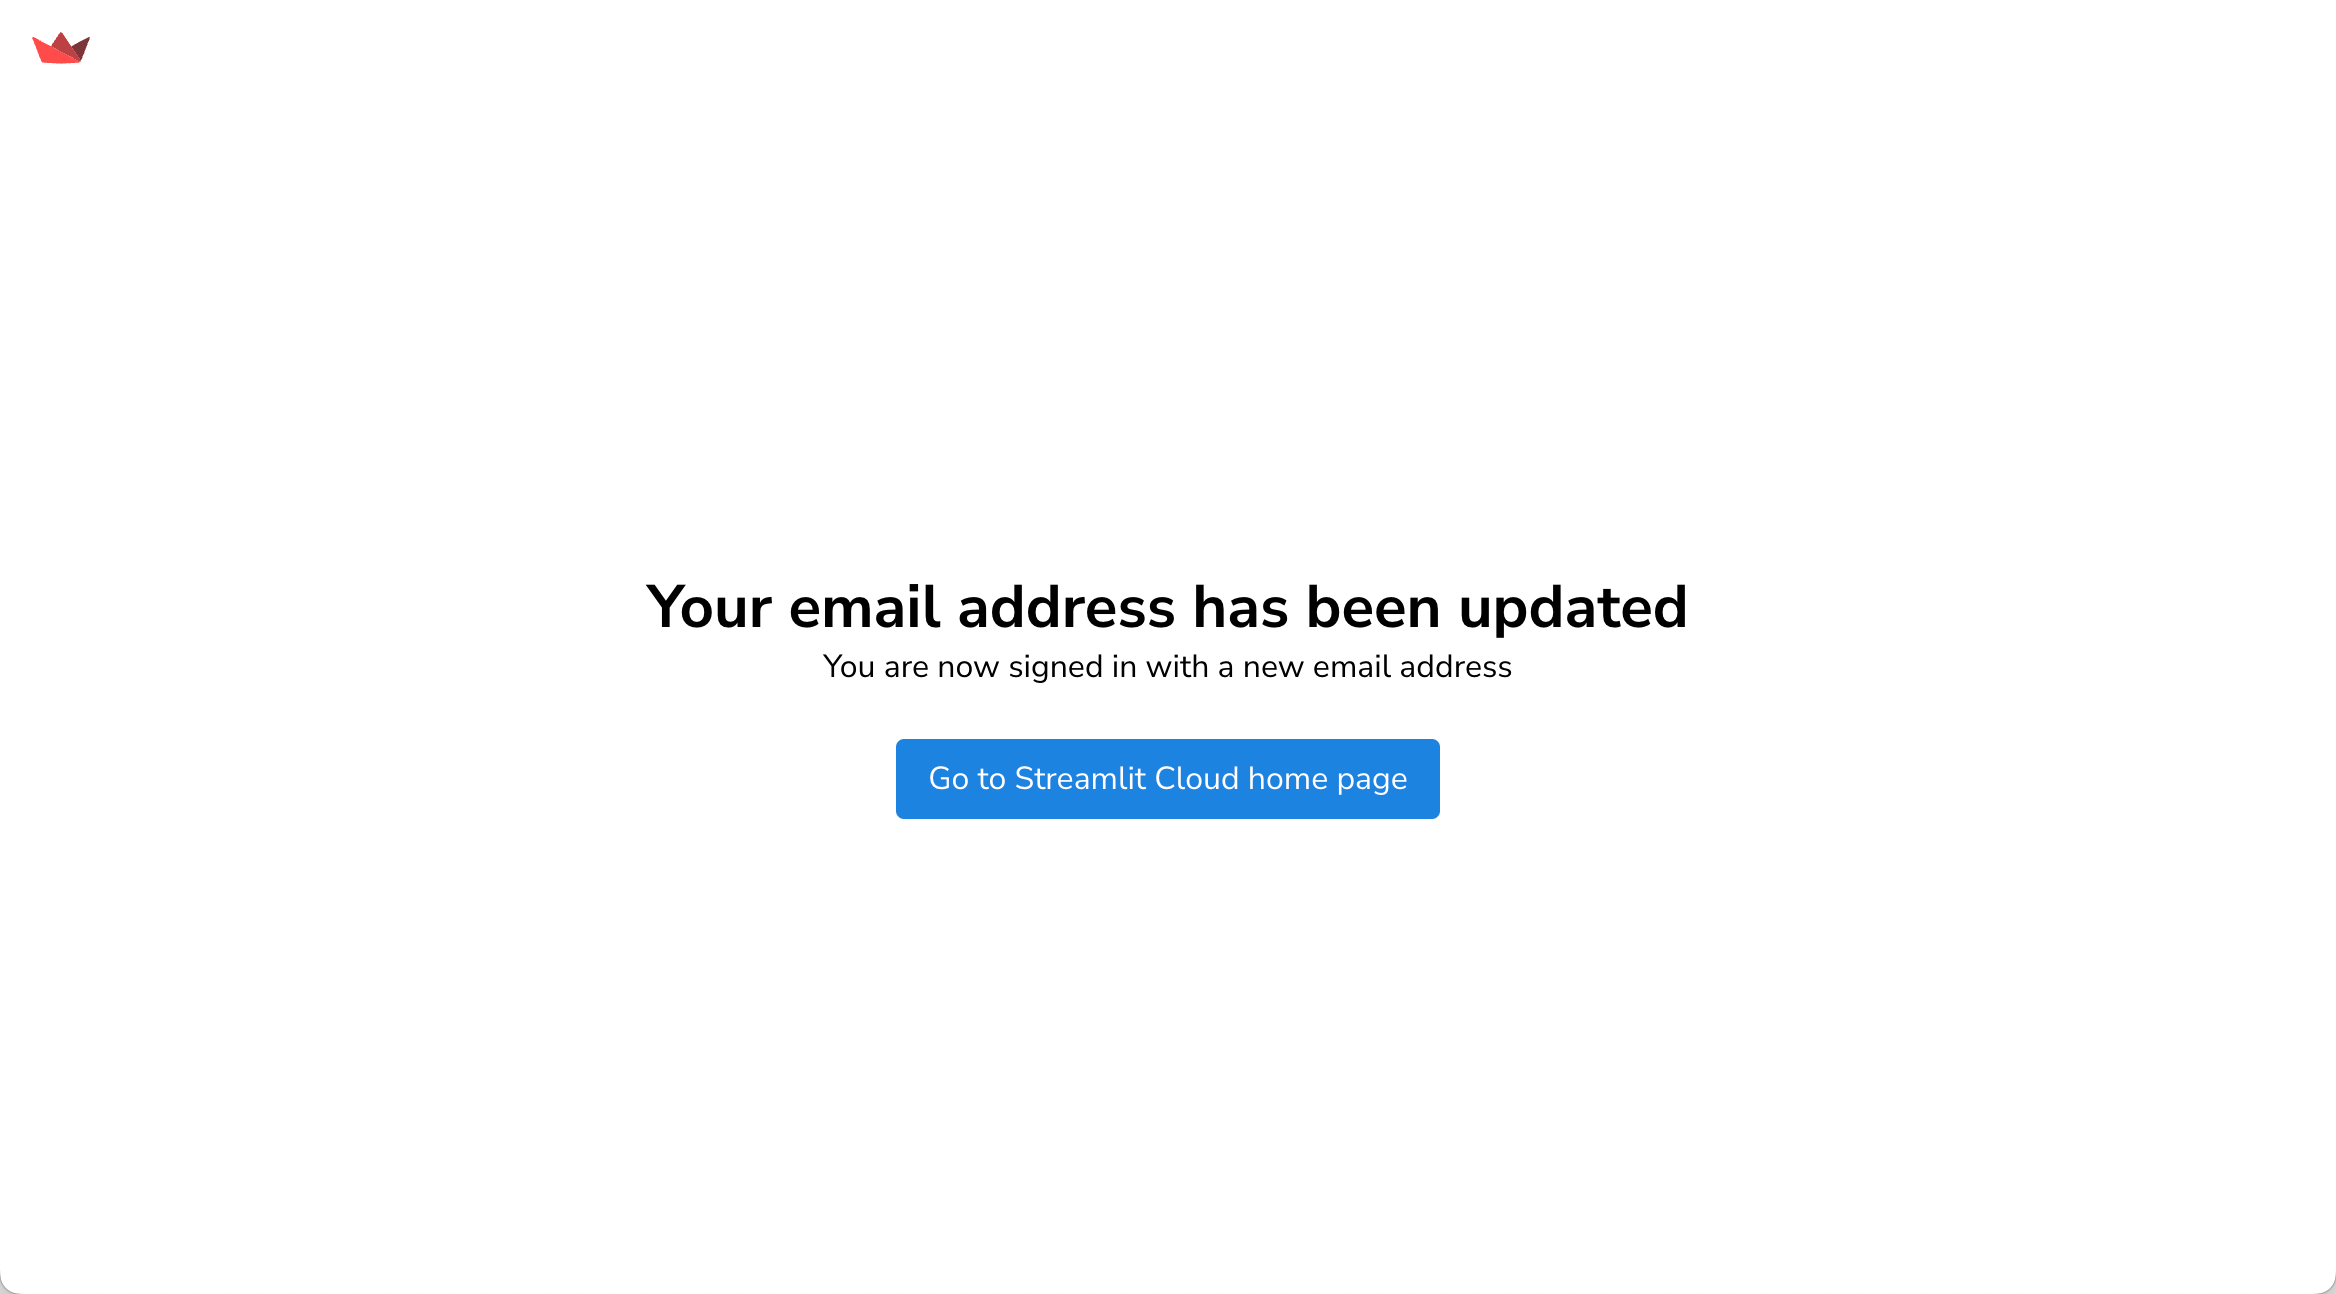 Confirmation that your email has been changed on your Streamlit Community Cloud account